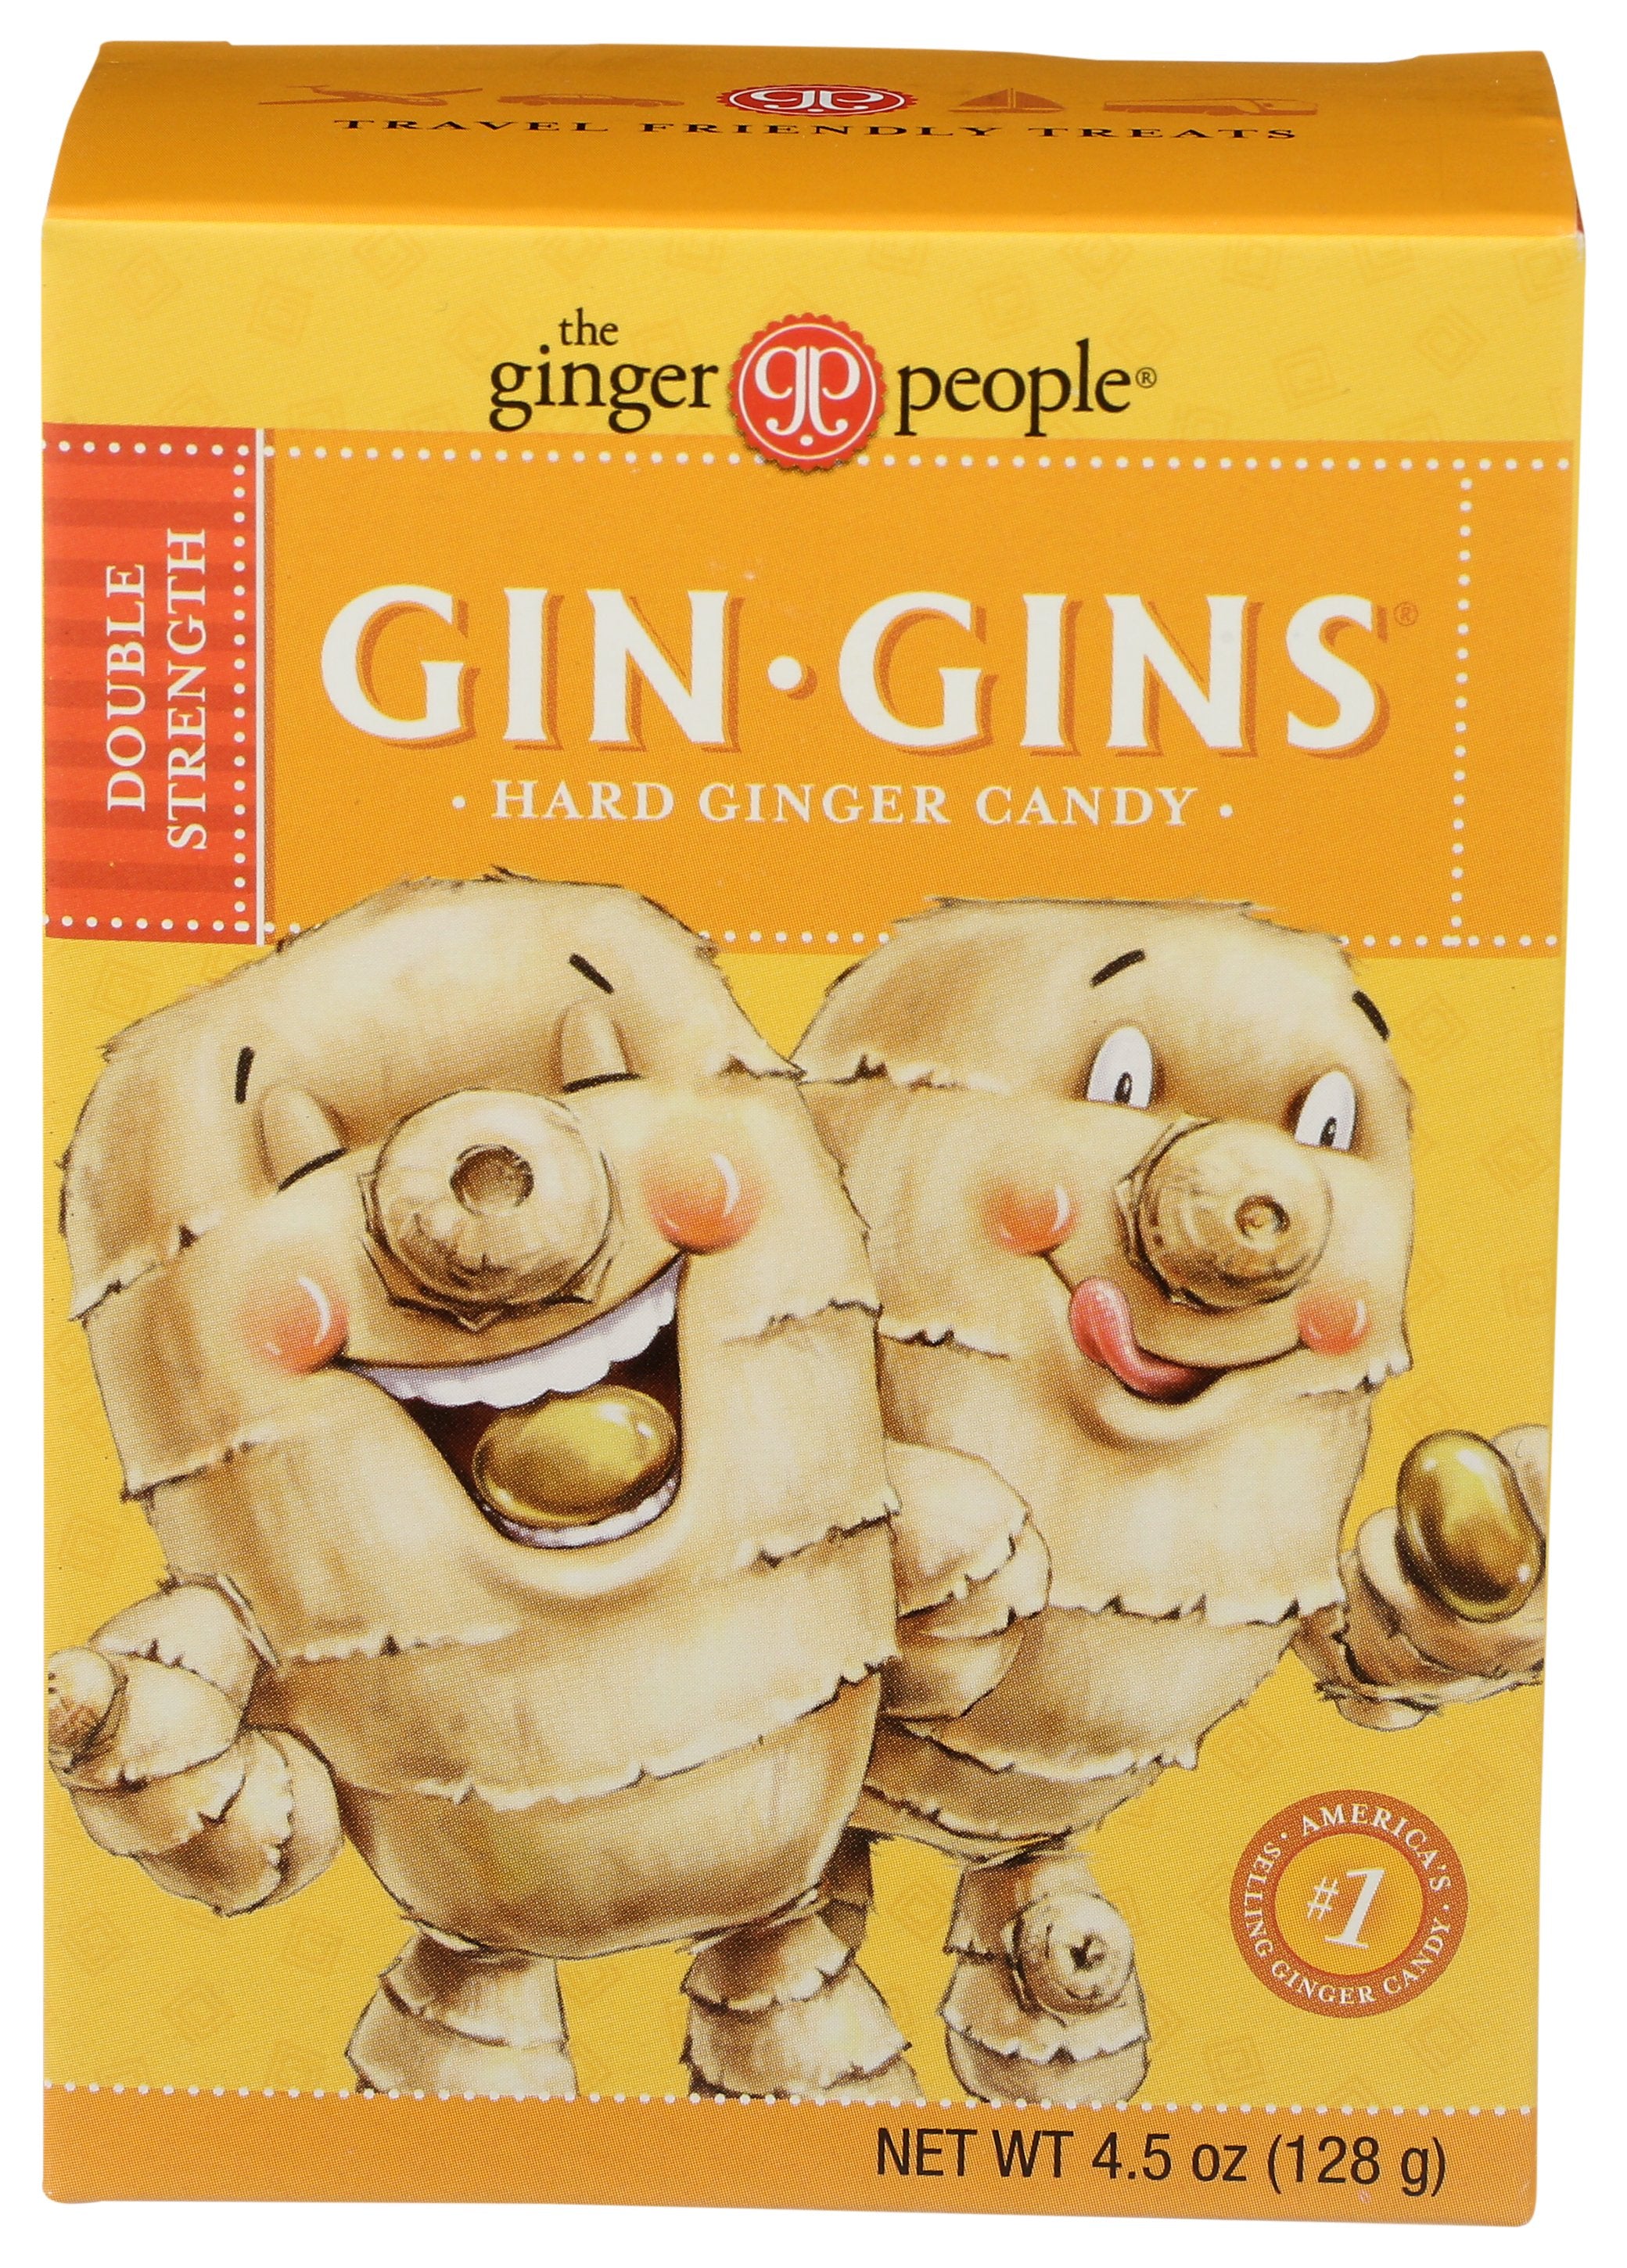 GINGER PEOPLE GNGR HARD CANDY BOX - Case of 12